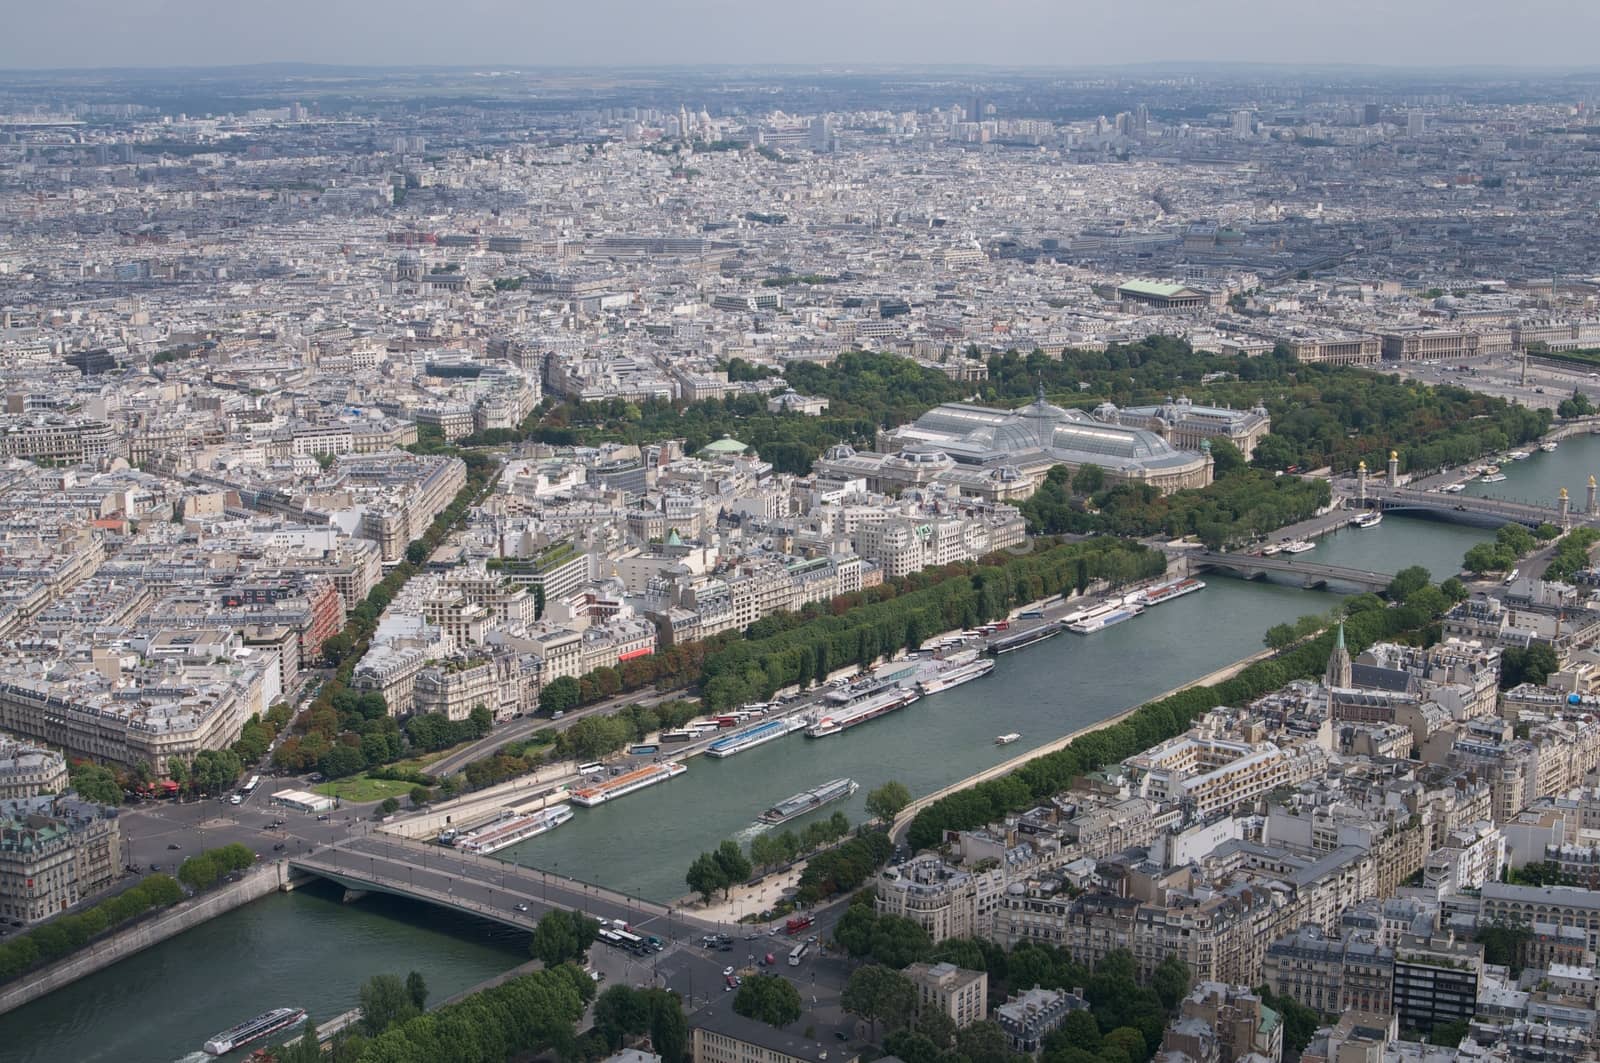 The view from the top of the Eifel tower